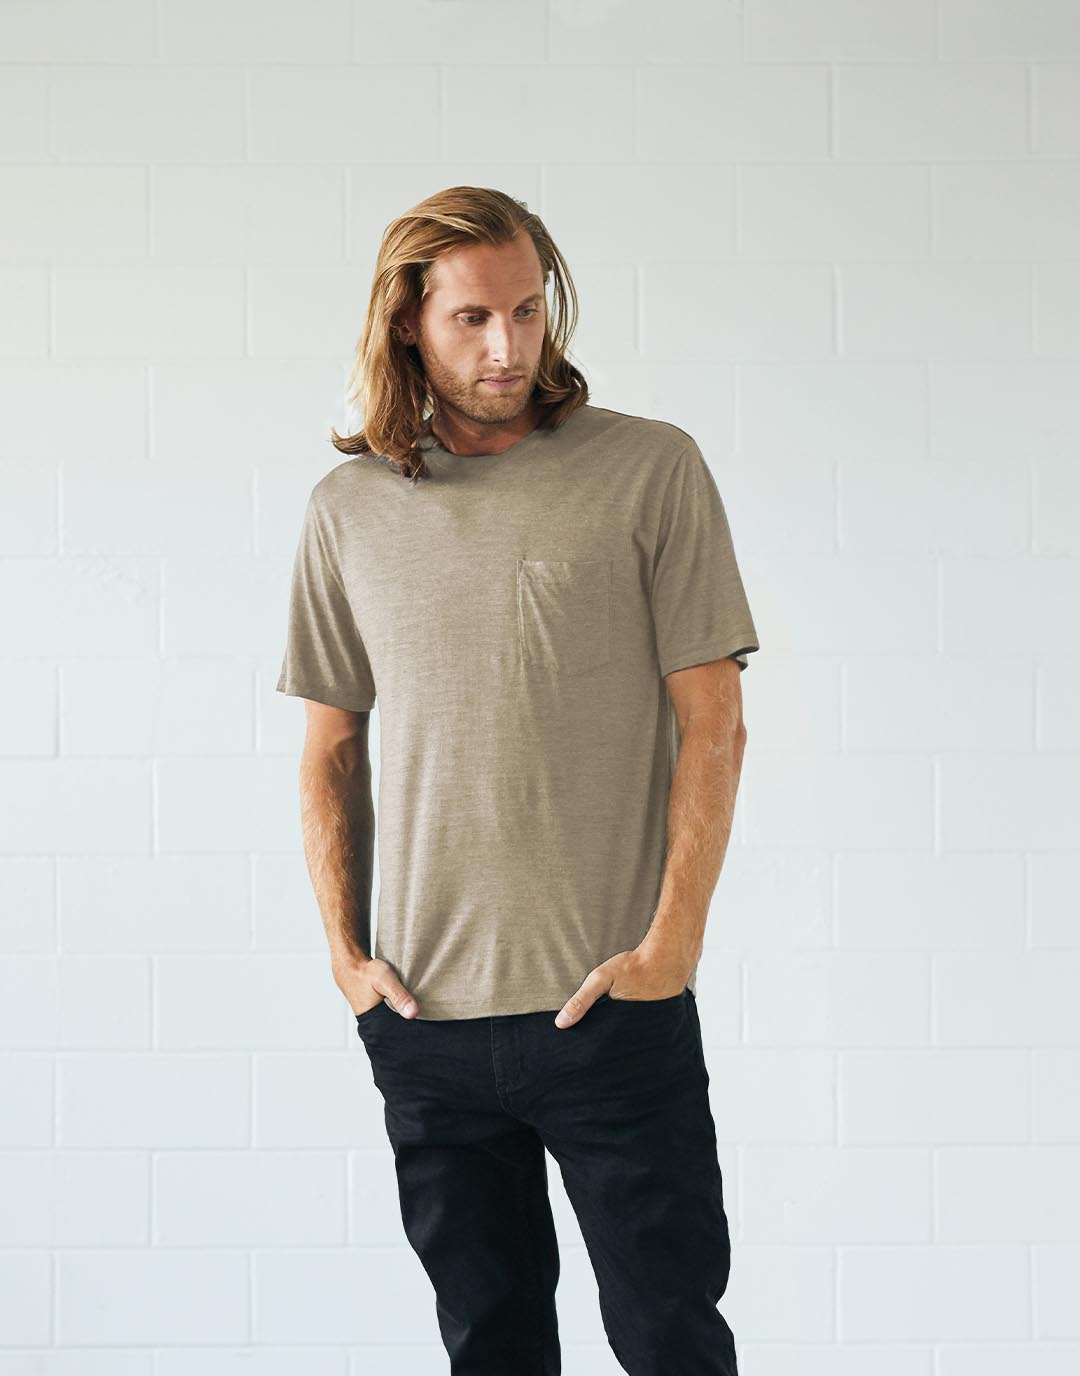 Man standing wearing a t-shirt dyed using natural, sustainably sourced plant pigments.